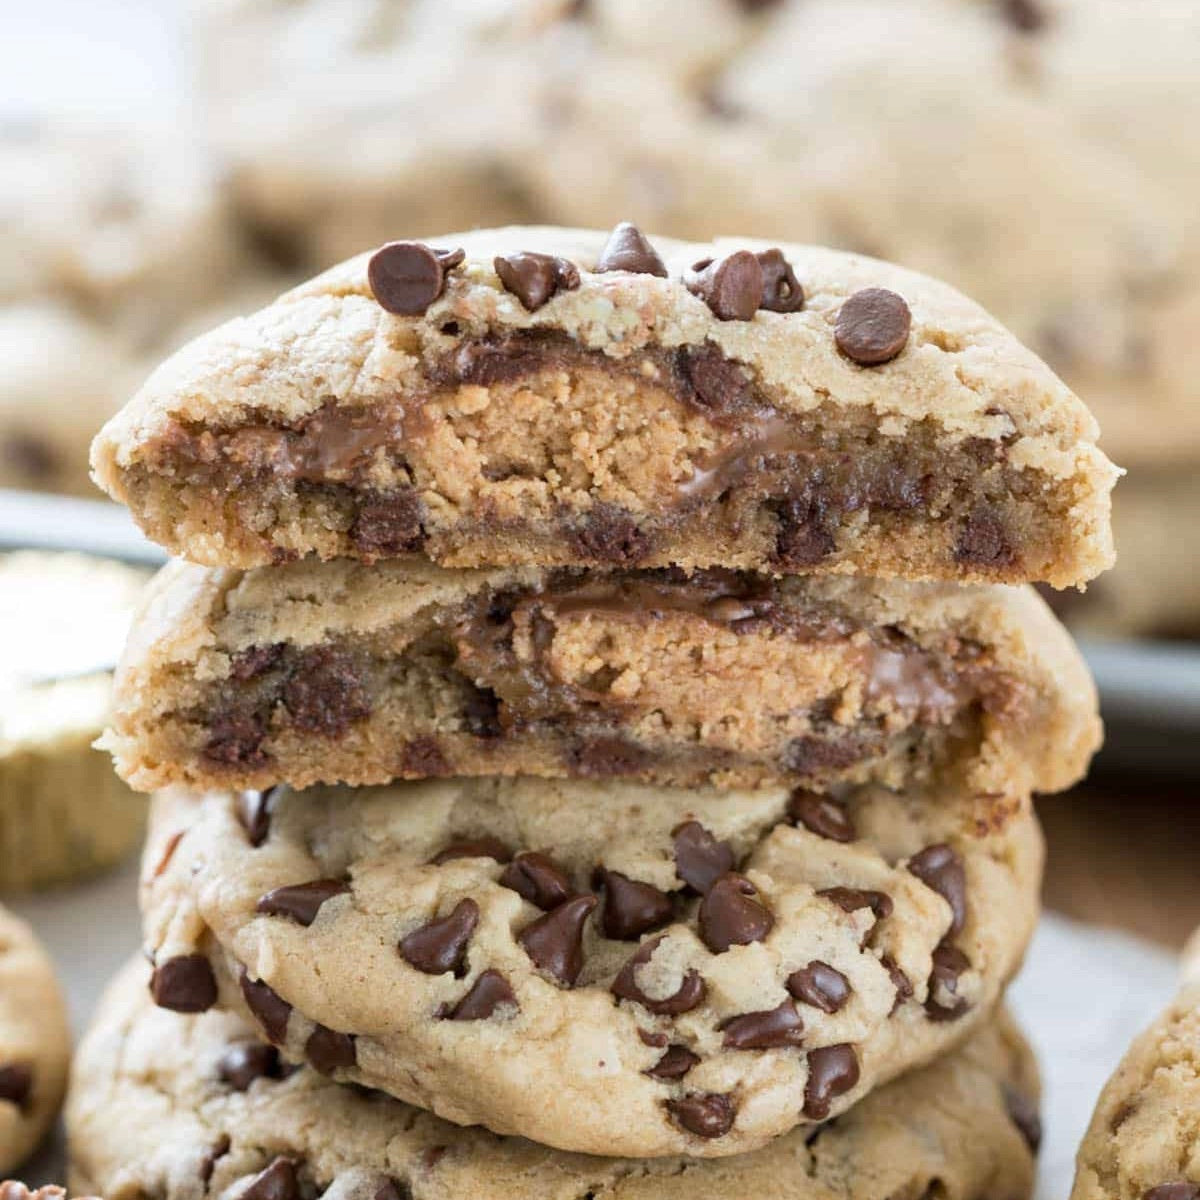 Colossal Peanut Butter Cup STUFFED Cookie (125g)